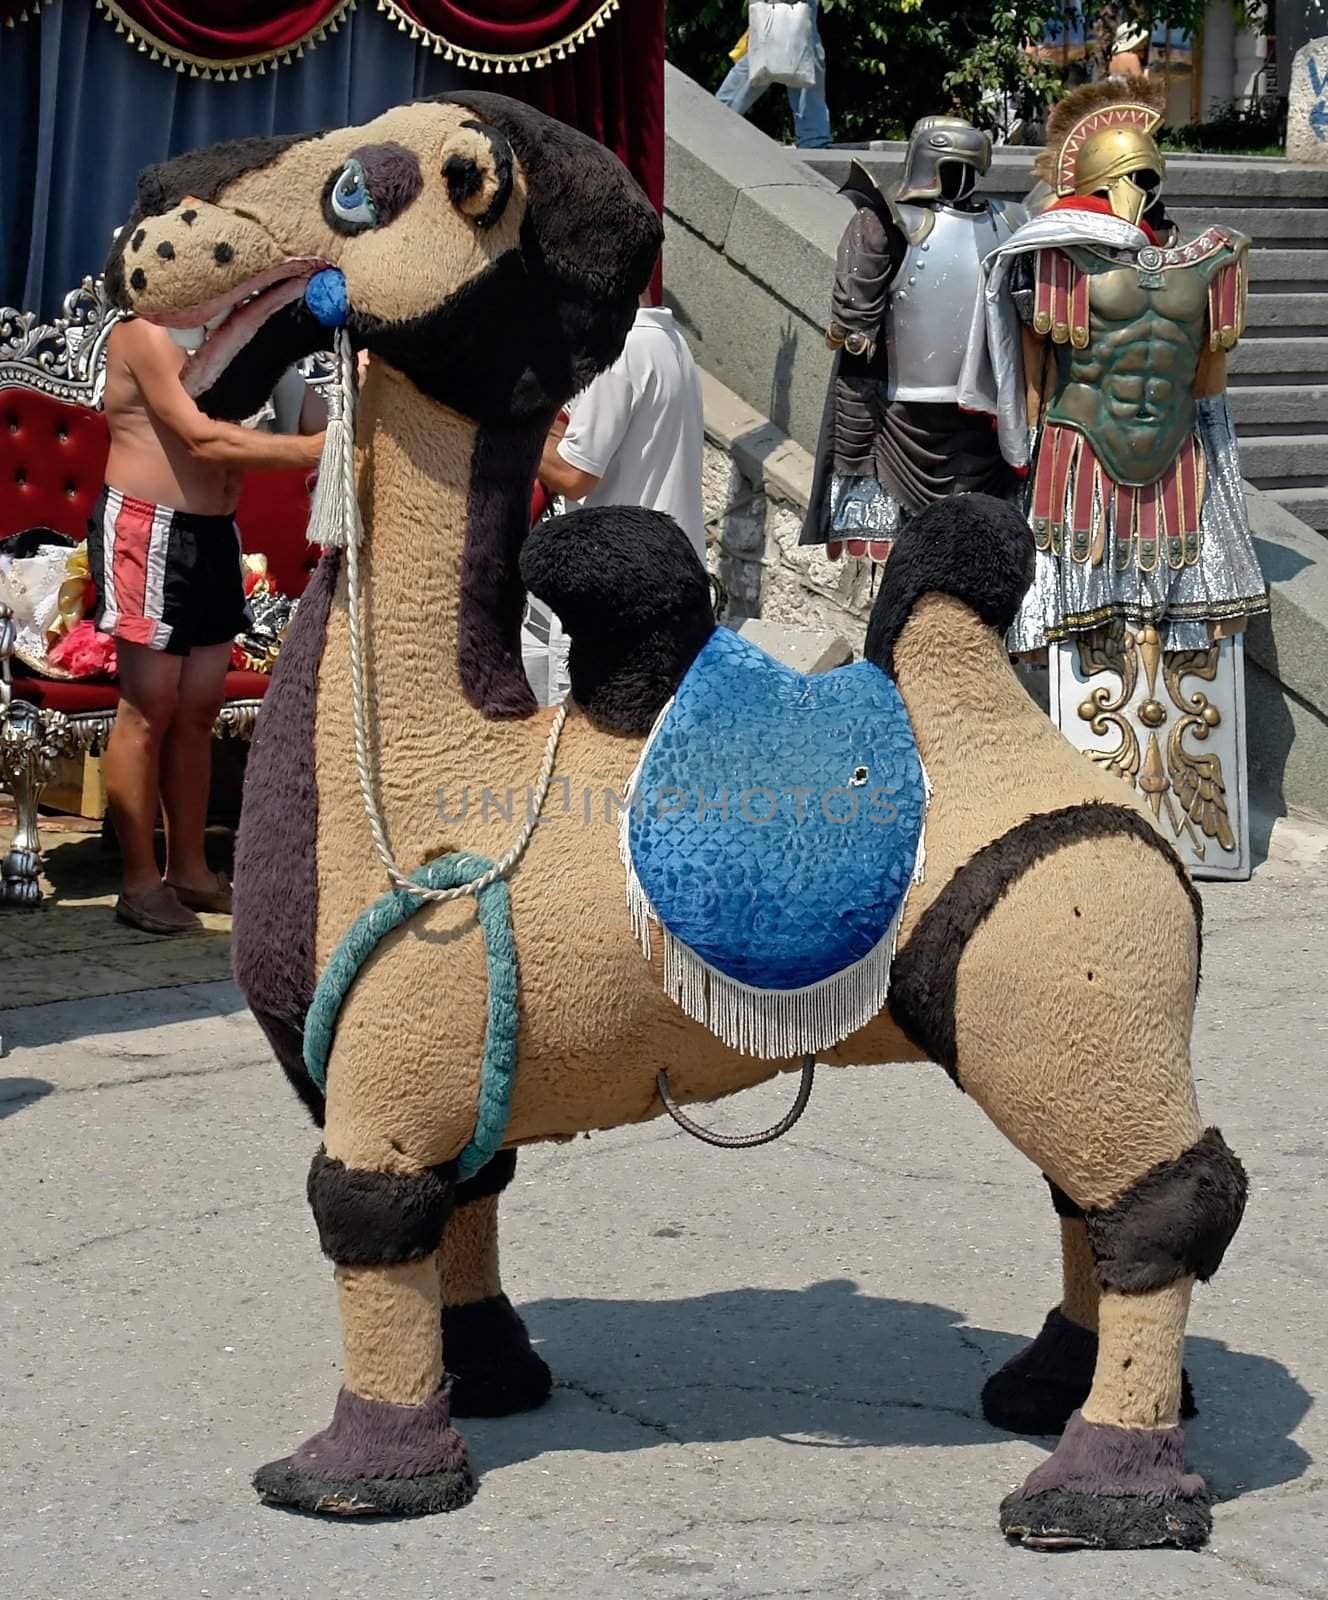 Merry camel. Very large toy.